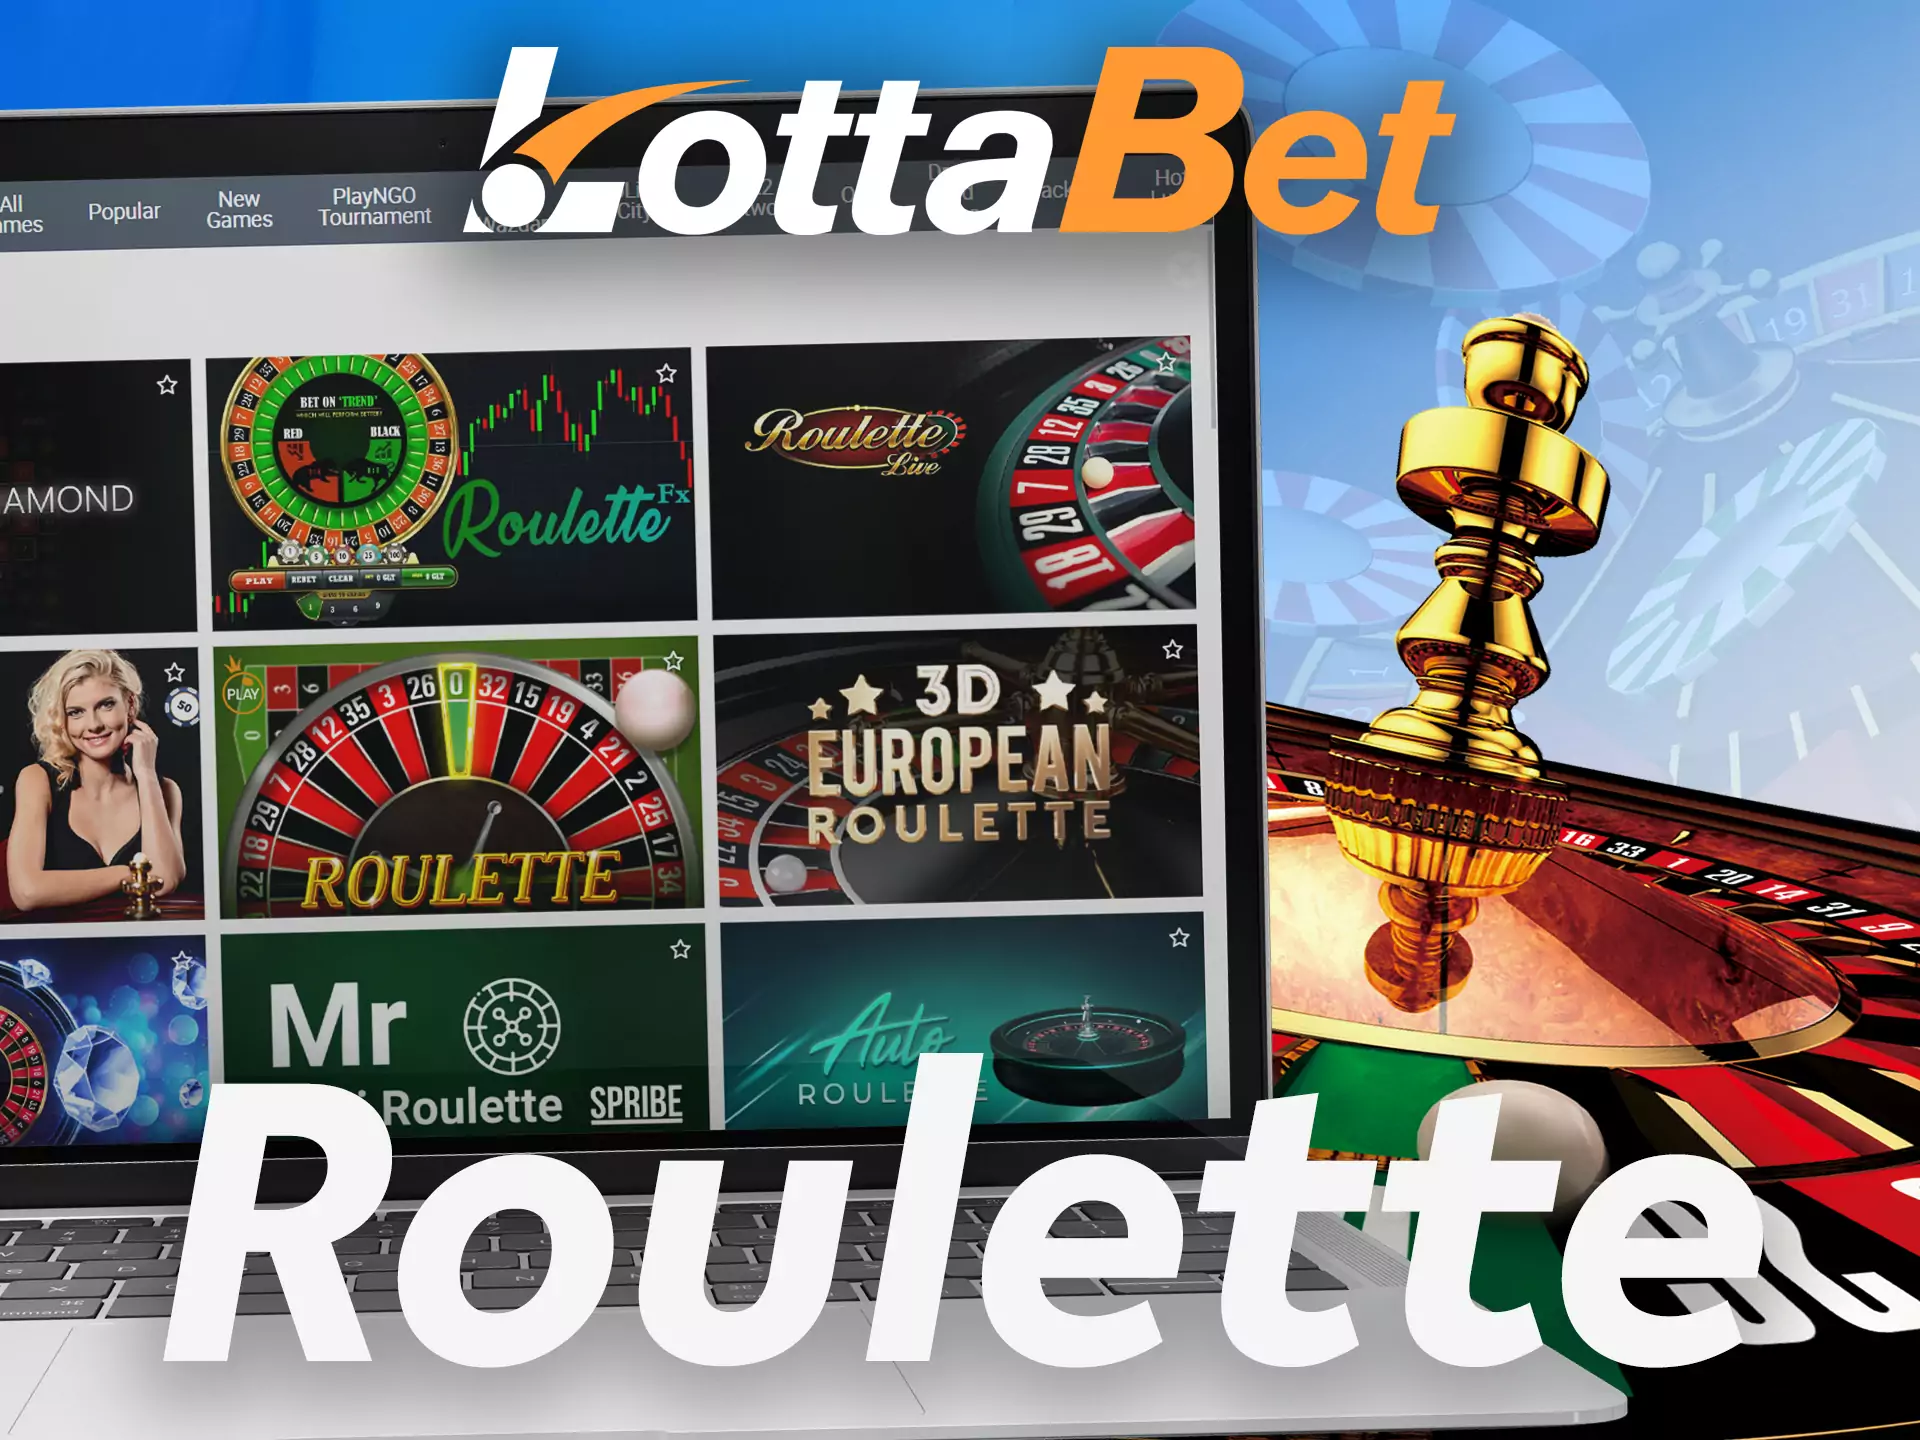 On Lottabet, you find a wide range of roulette games.